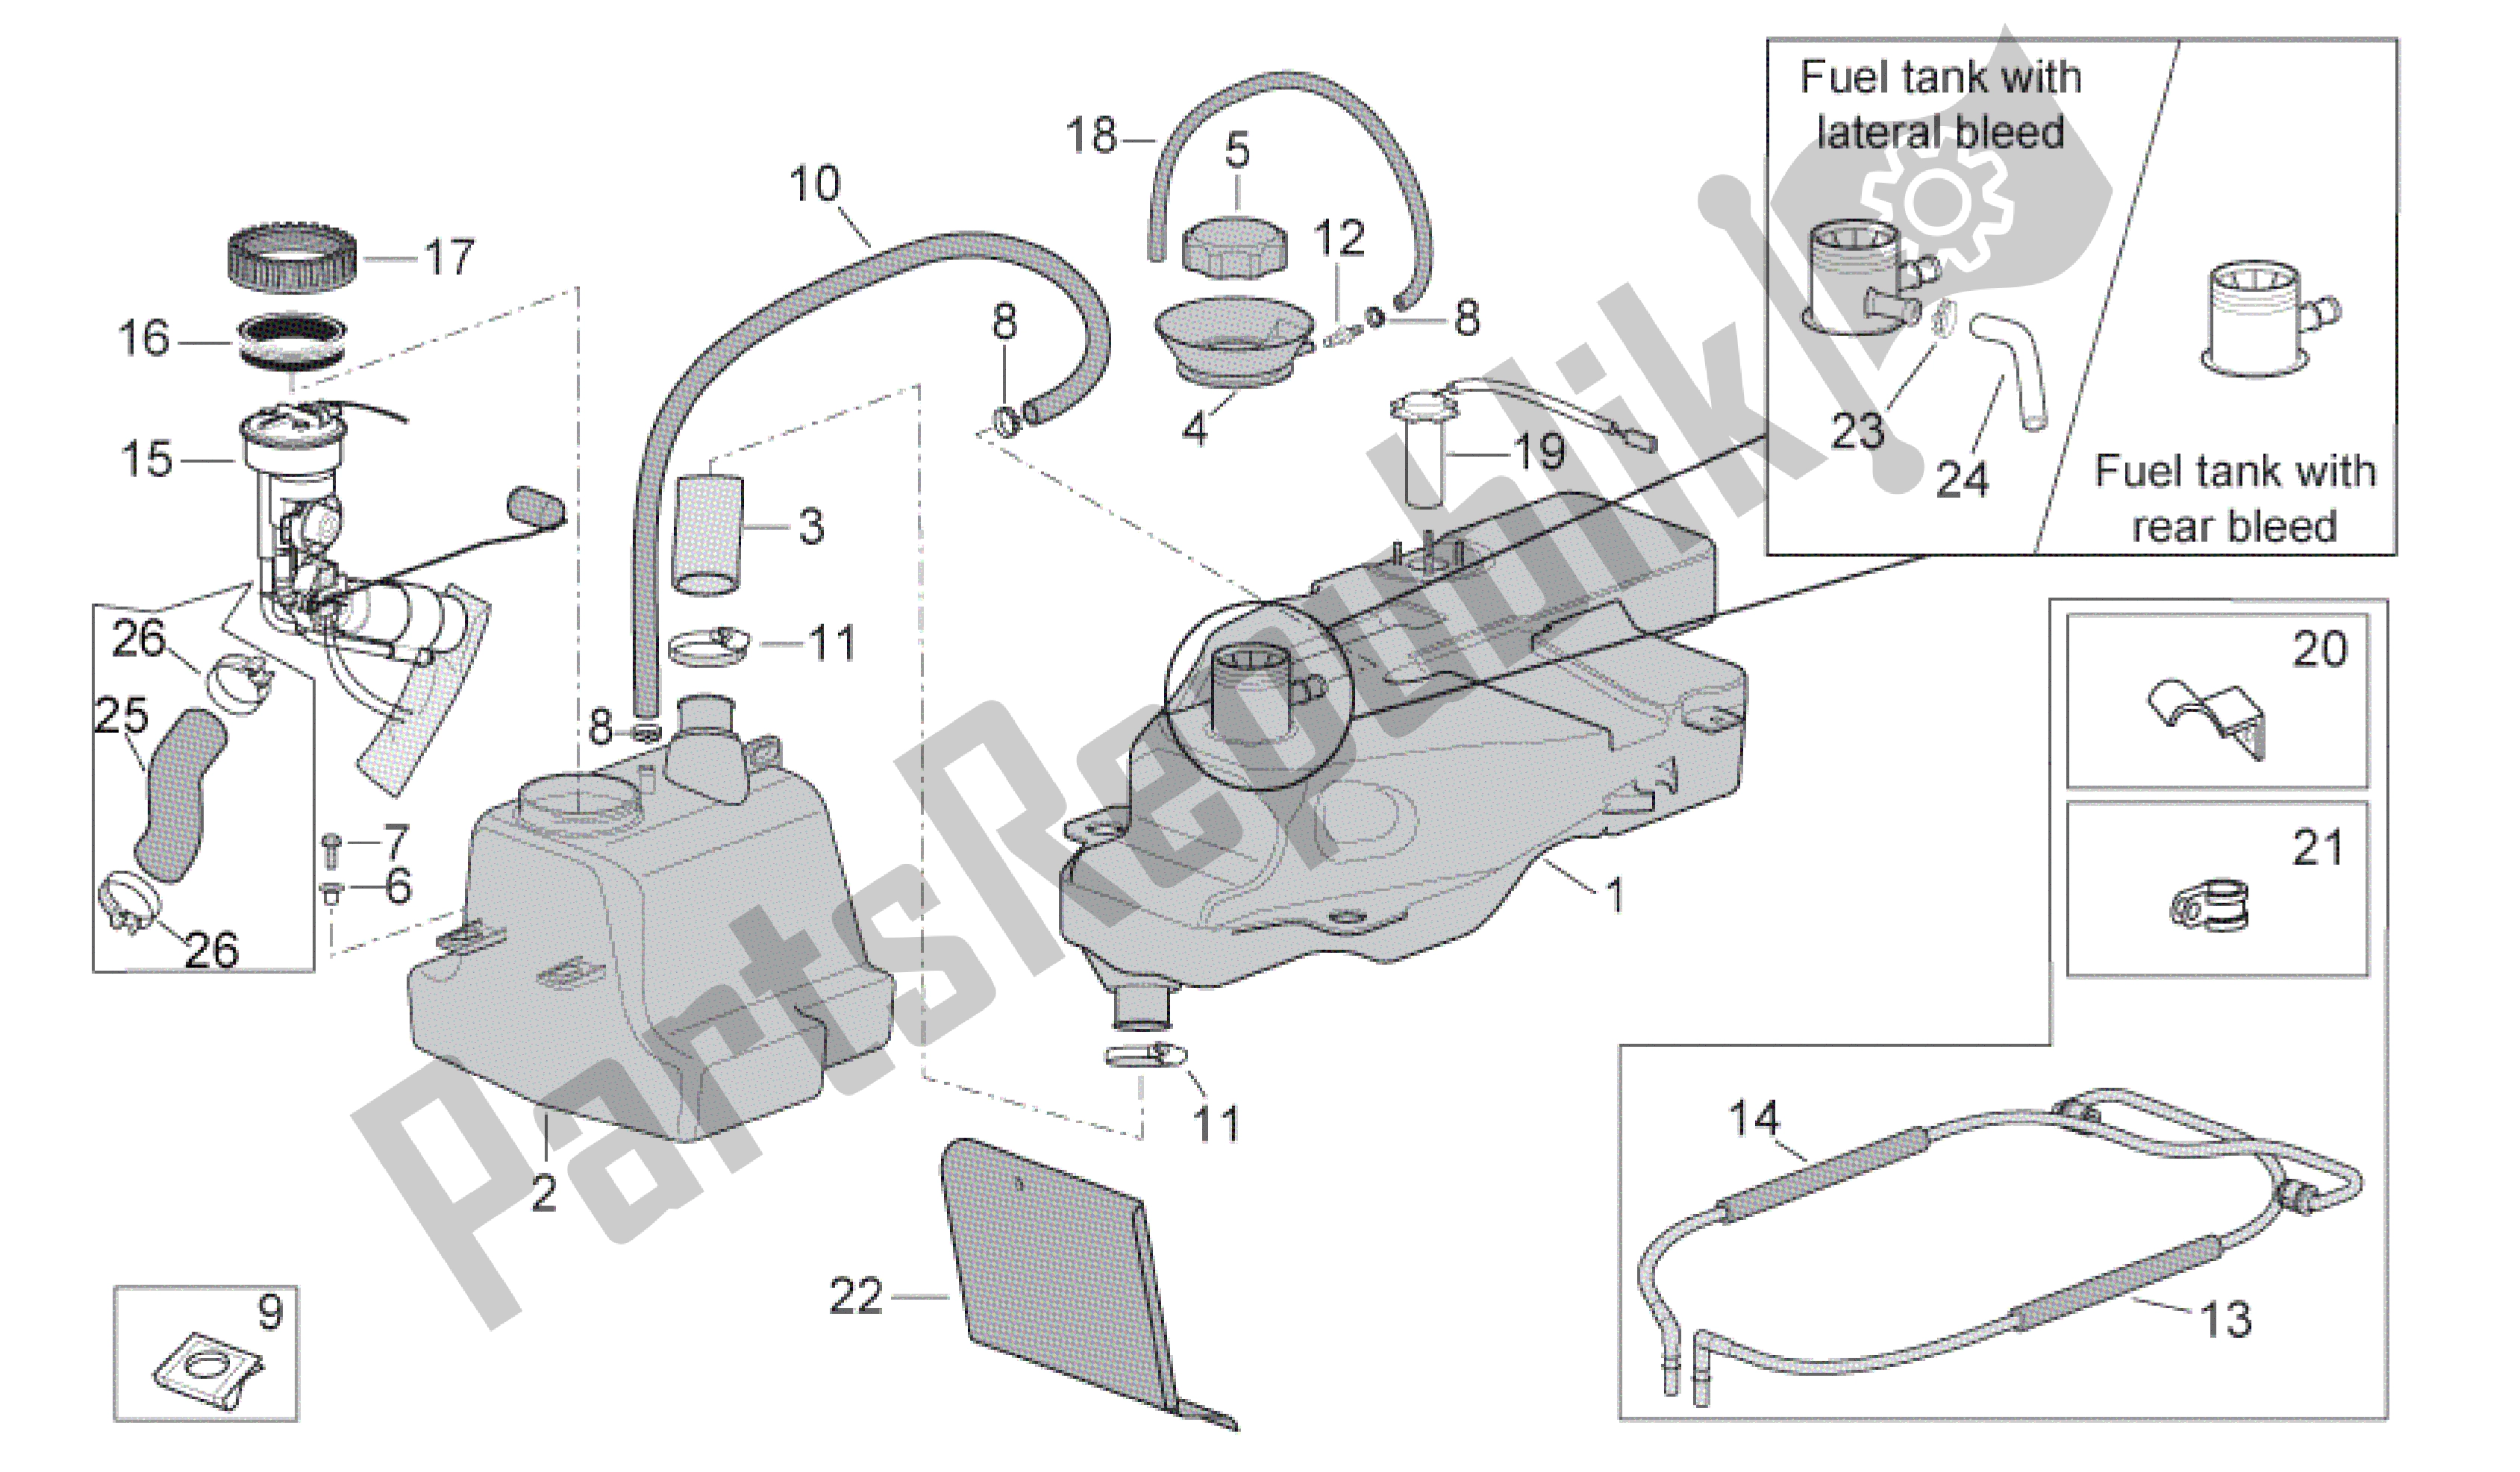 All parts for the Fuel Tank of the Aprilia Scarabeo 500 2003 - 2006